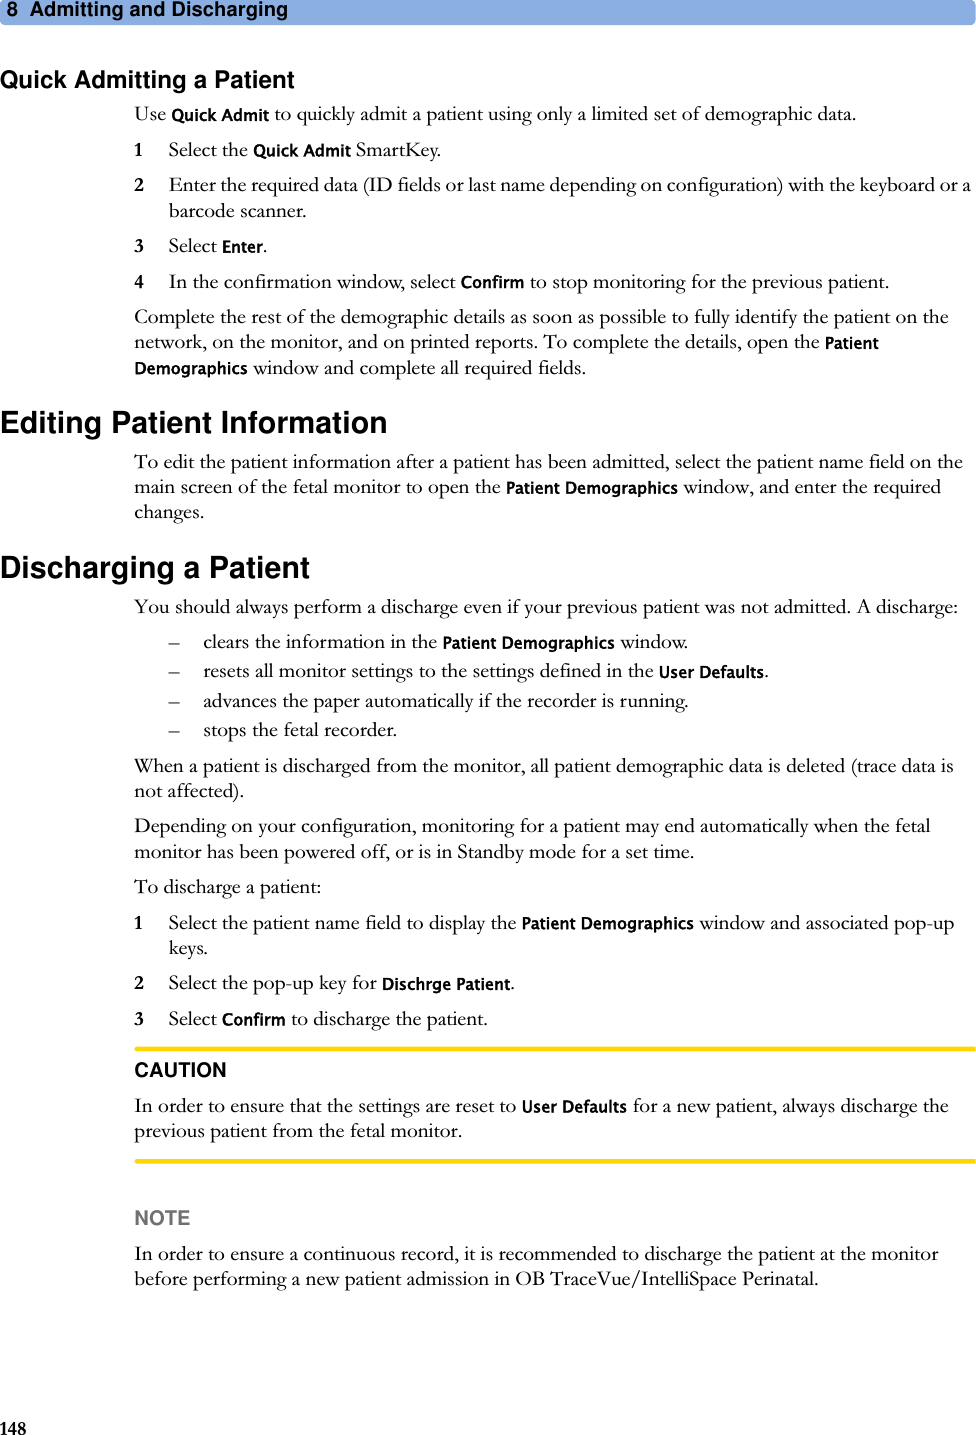 8  Admitting and Discharging148Quick Admitting a PatientUse Quick Admit to quickly admit a patient using only a limited set of demographic data.1Select the Quick Admit SmartKey.2Enter the required data (ID fields or last name depending on configuration) with the keyboard or a barcode scanner.3Select Enter.4In the confirmation window, select Confirm to stop monitoring for the previous patient.Complete the rest of the demographic details as soon as possible to fully identify the patient on the network, on the monitor, and on printed reports. To complete the details, open the Patient Demographics window and complete all required fields.Editing Patient InformationTo edit the patient information after a patient has been admitted, select the patient name field on the main screen of the fetal monitor to open the Patient Demographics window, and enter the required changes.Discharging a PatientYou should always perform a discharge even if your previous patient was not admitted. A discharge:– clears the information in the Patient Demographics window.– resets all monitor settings to the settings defined in the User Defaults.– advances the paper automatically if the recorder is running.– stops the fetal recorder.When a patient is discharged from the monitor, all patient demographic data is deleted (trace data is not affected).Depending on your configuration, monitoring for a patient may end automatically when the fetal monitor has been powered off, or is in Standby mode for a set time.To discharge a patient:1Select the patient name field to display the Patient Demographics window and associated pop-up keys.2Select the pop-up key for Dischrge Patient.3Select Confirm to discharge the patient.CAUTIONIn order to ensure that the settings are reset to User Defaults for a new patient, always discharge the previous patient from the fetal monitor.NOTEIn order to ensure a continuous record, it is recommended to discharge the patient at the monitor before performing a new patient admission in OB TraceVue/IntelliSpace Perinatal.